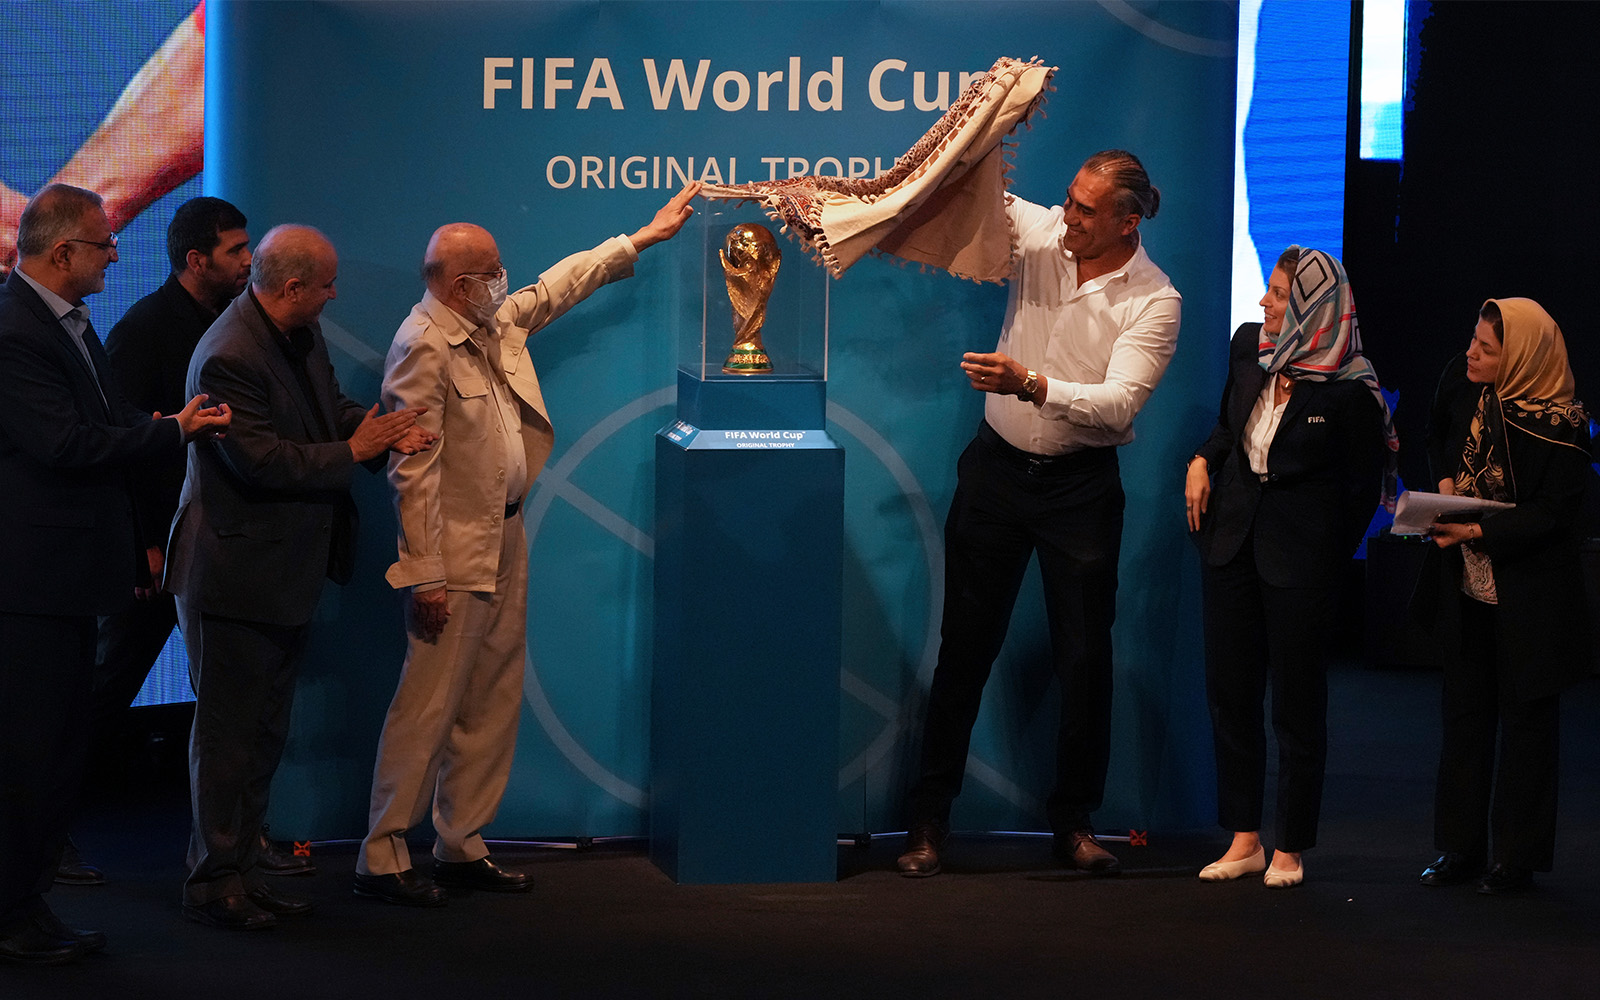 In first, Iran displays FIFA World Cup trophy during pre-tournament global tour The Times of Israel